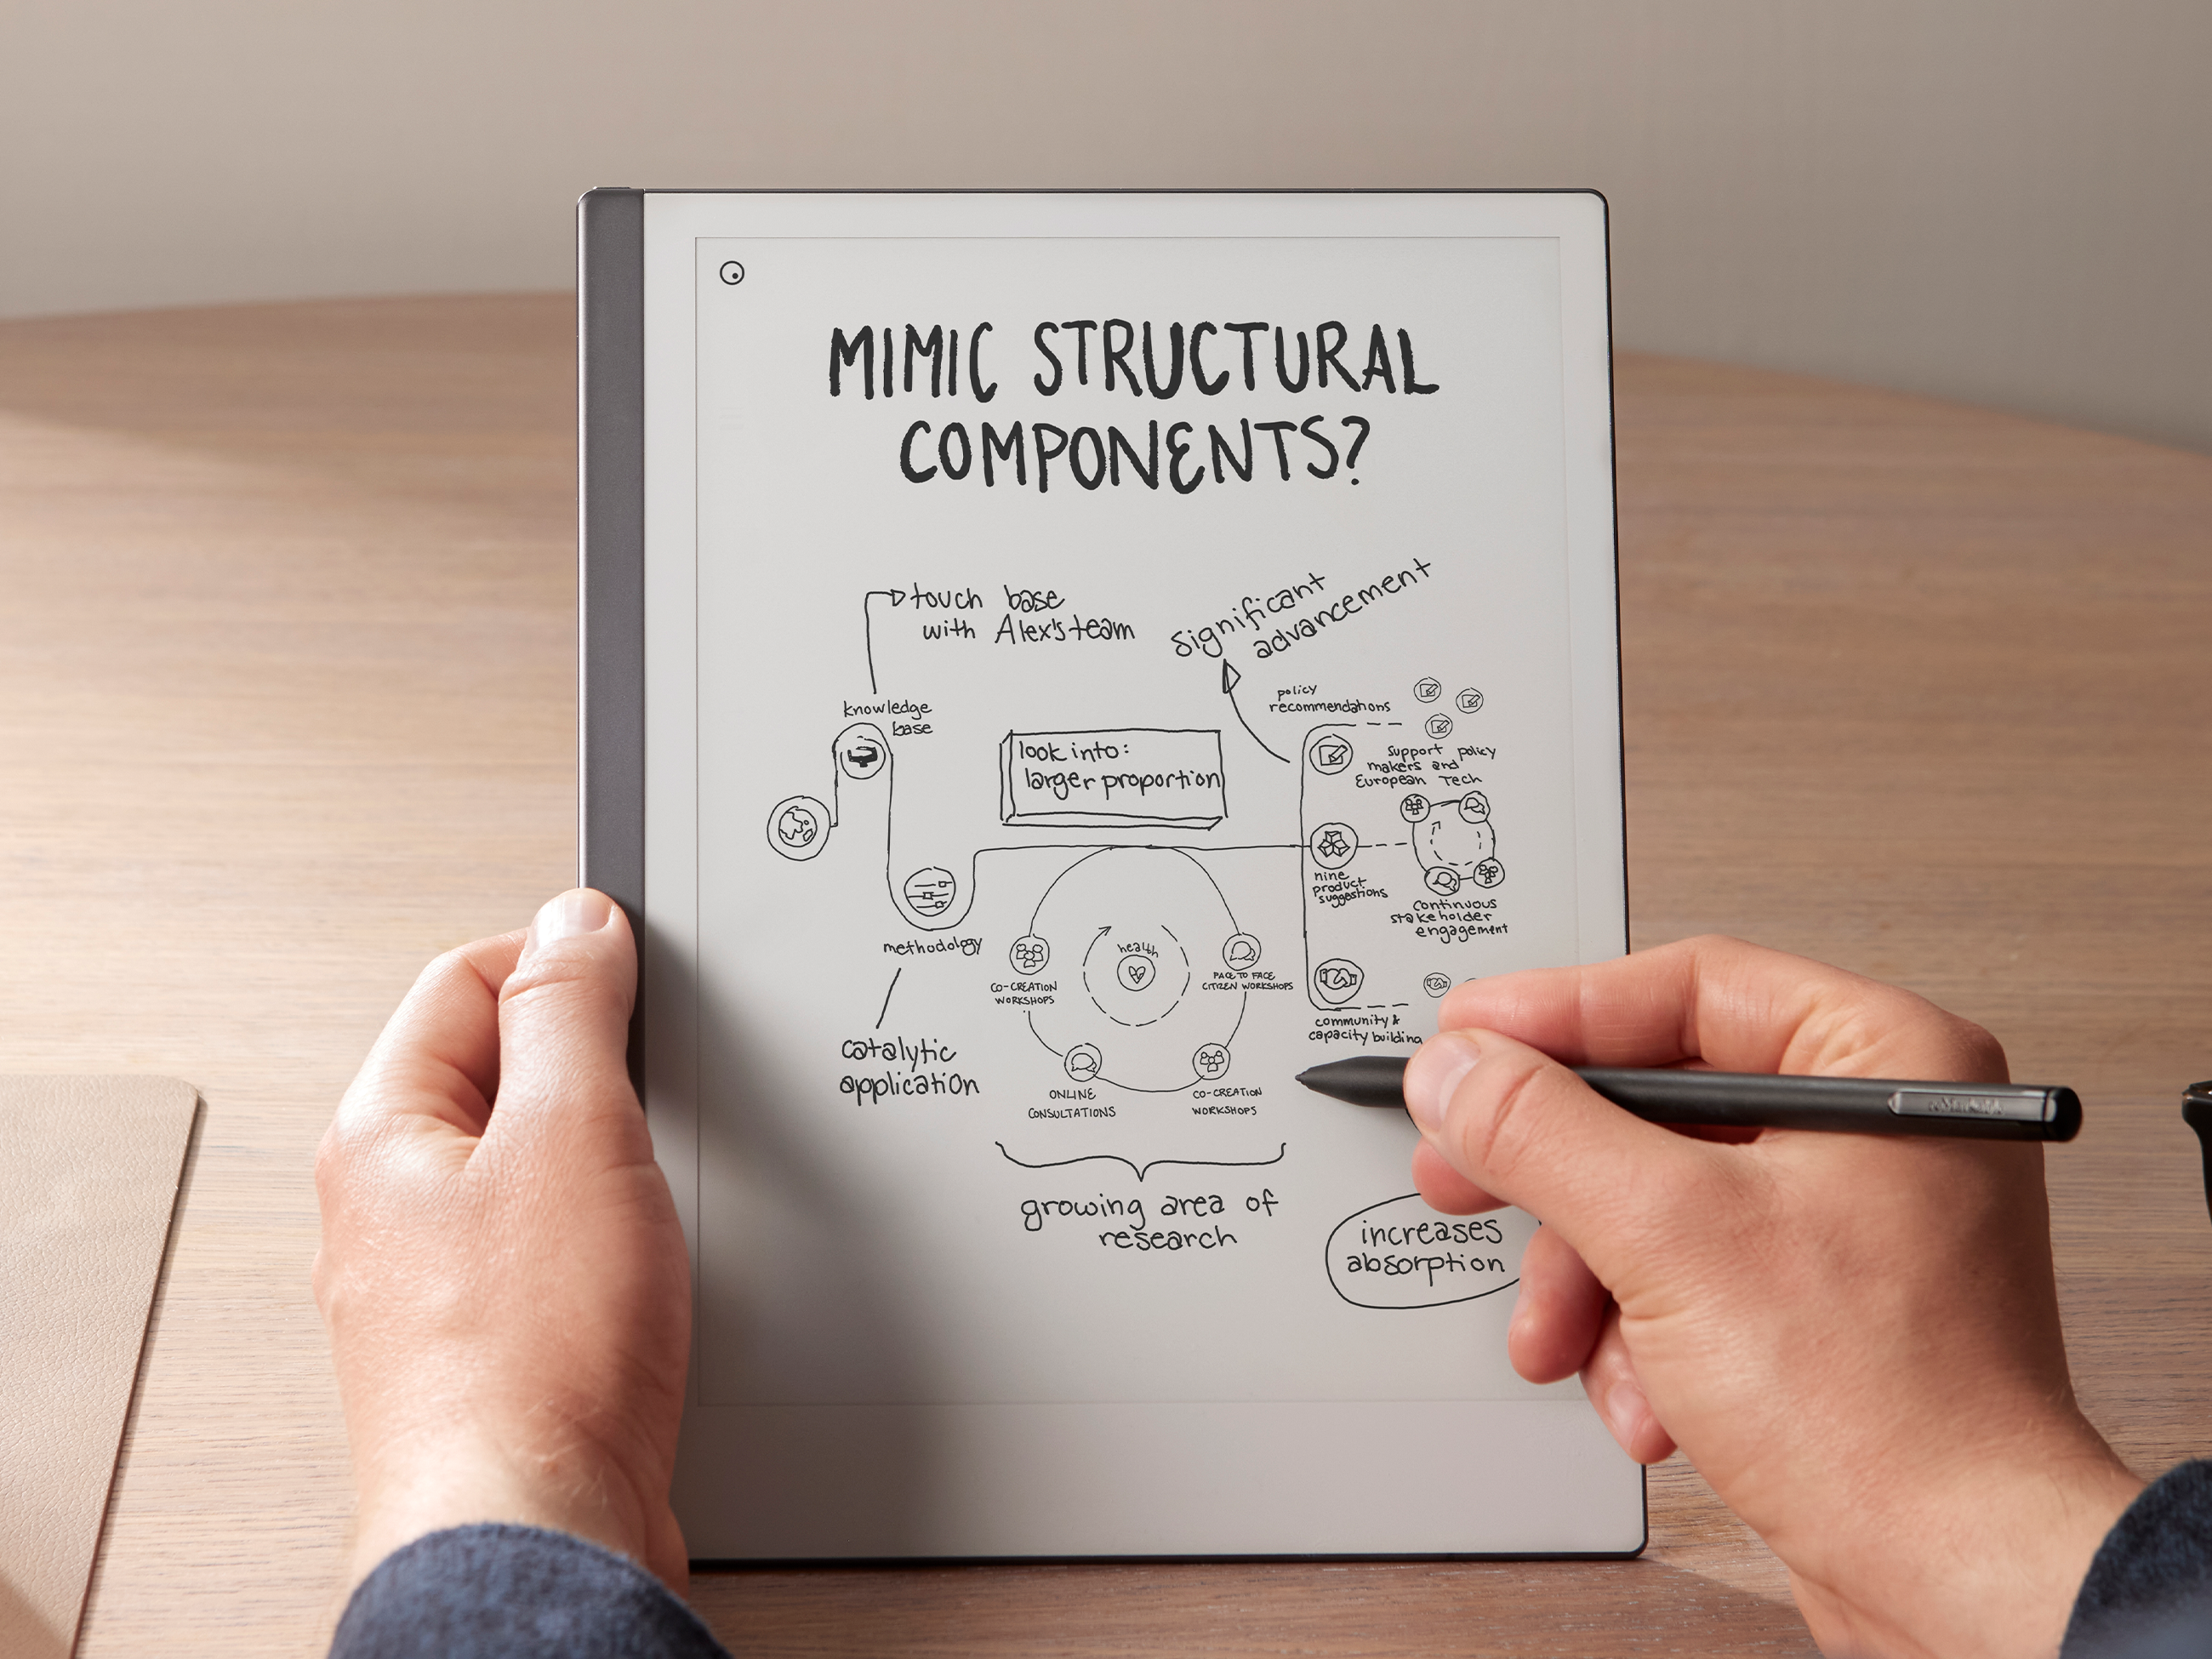 Hands holding a Remarkable 2 tablet and stylus, with notes on the screen titled "Mimic Structural components" 